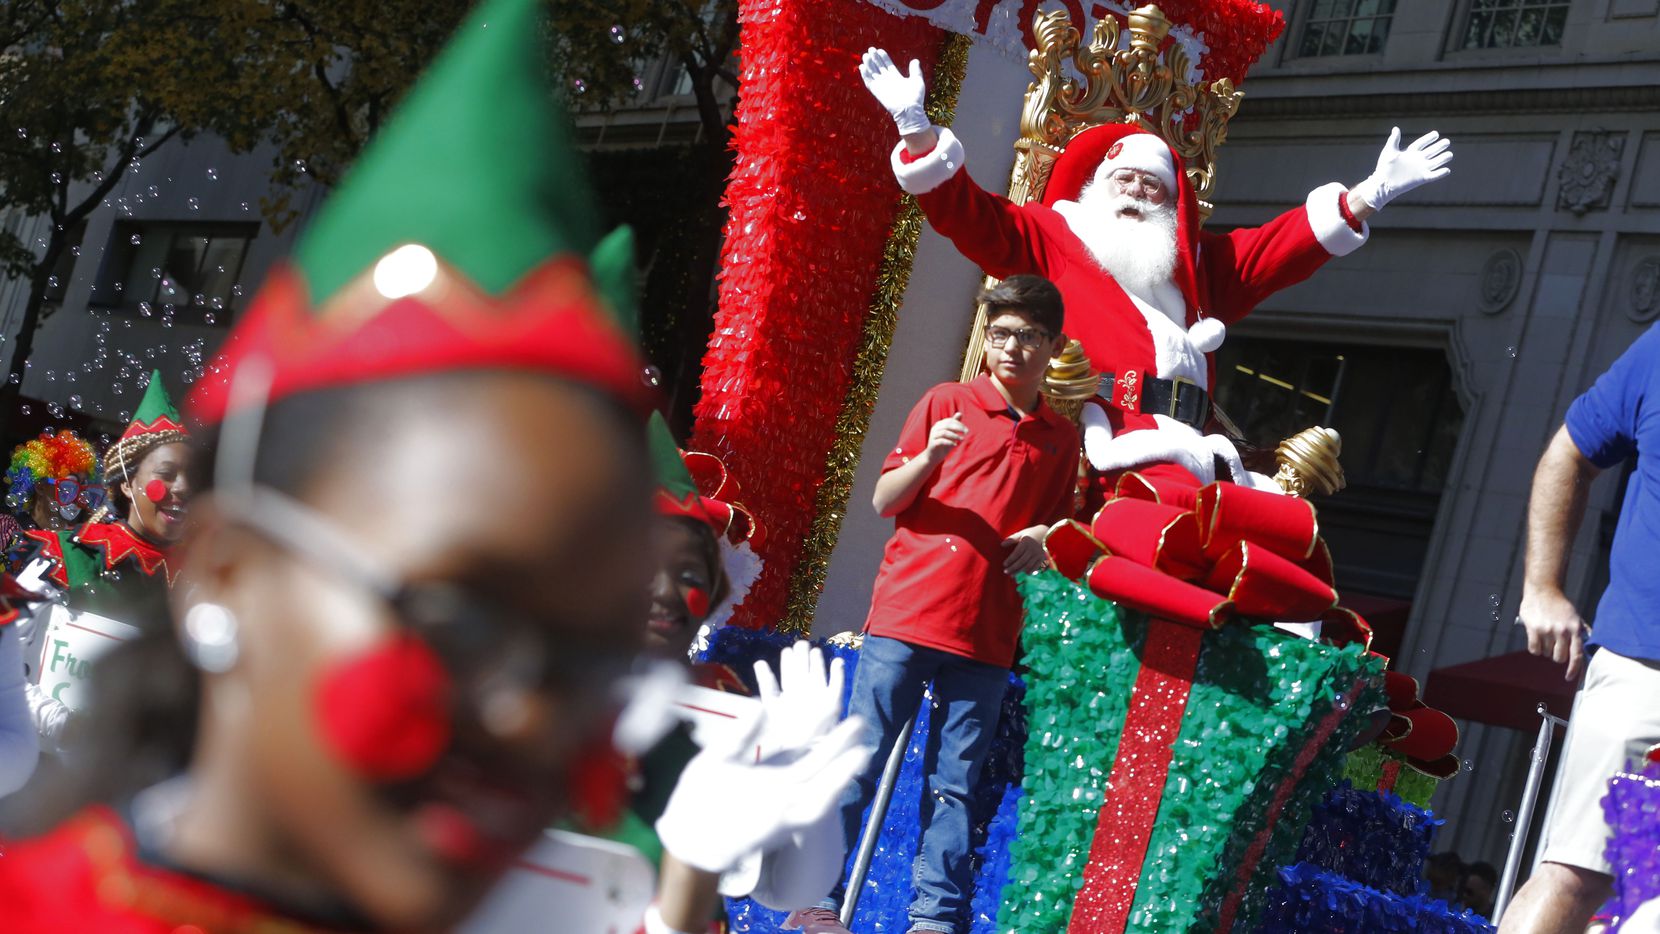 Santa Claus greets the people during the Dallas Holiday Parade in this 2018 file photo....